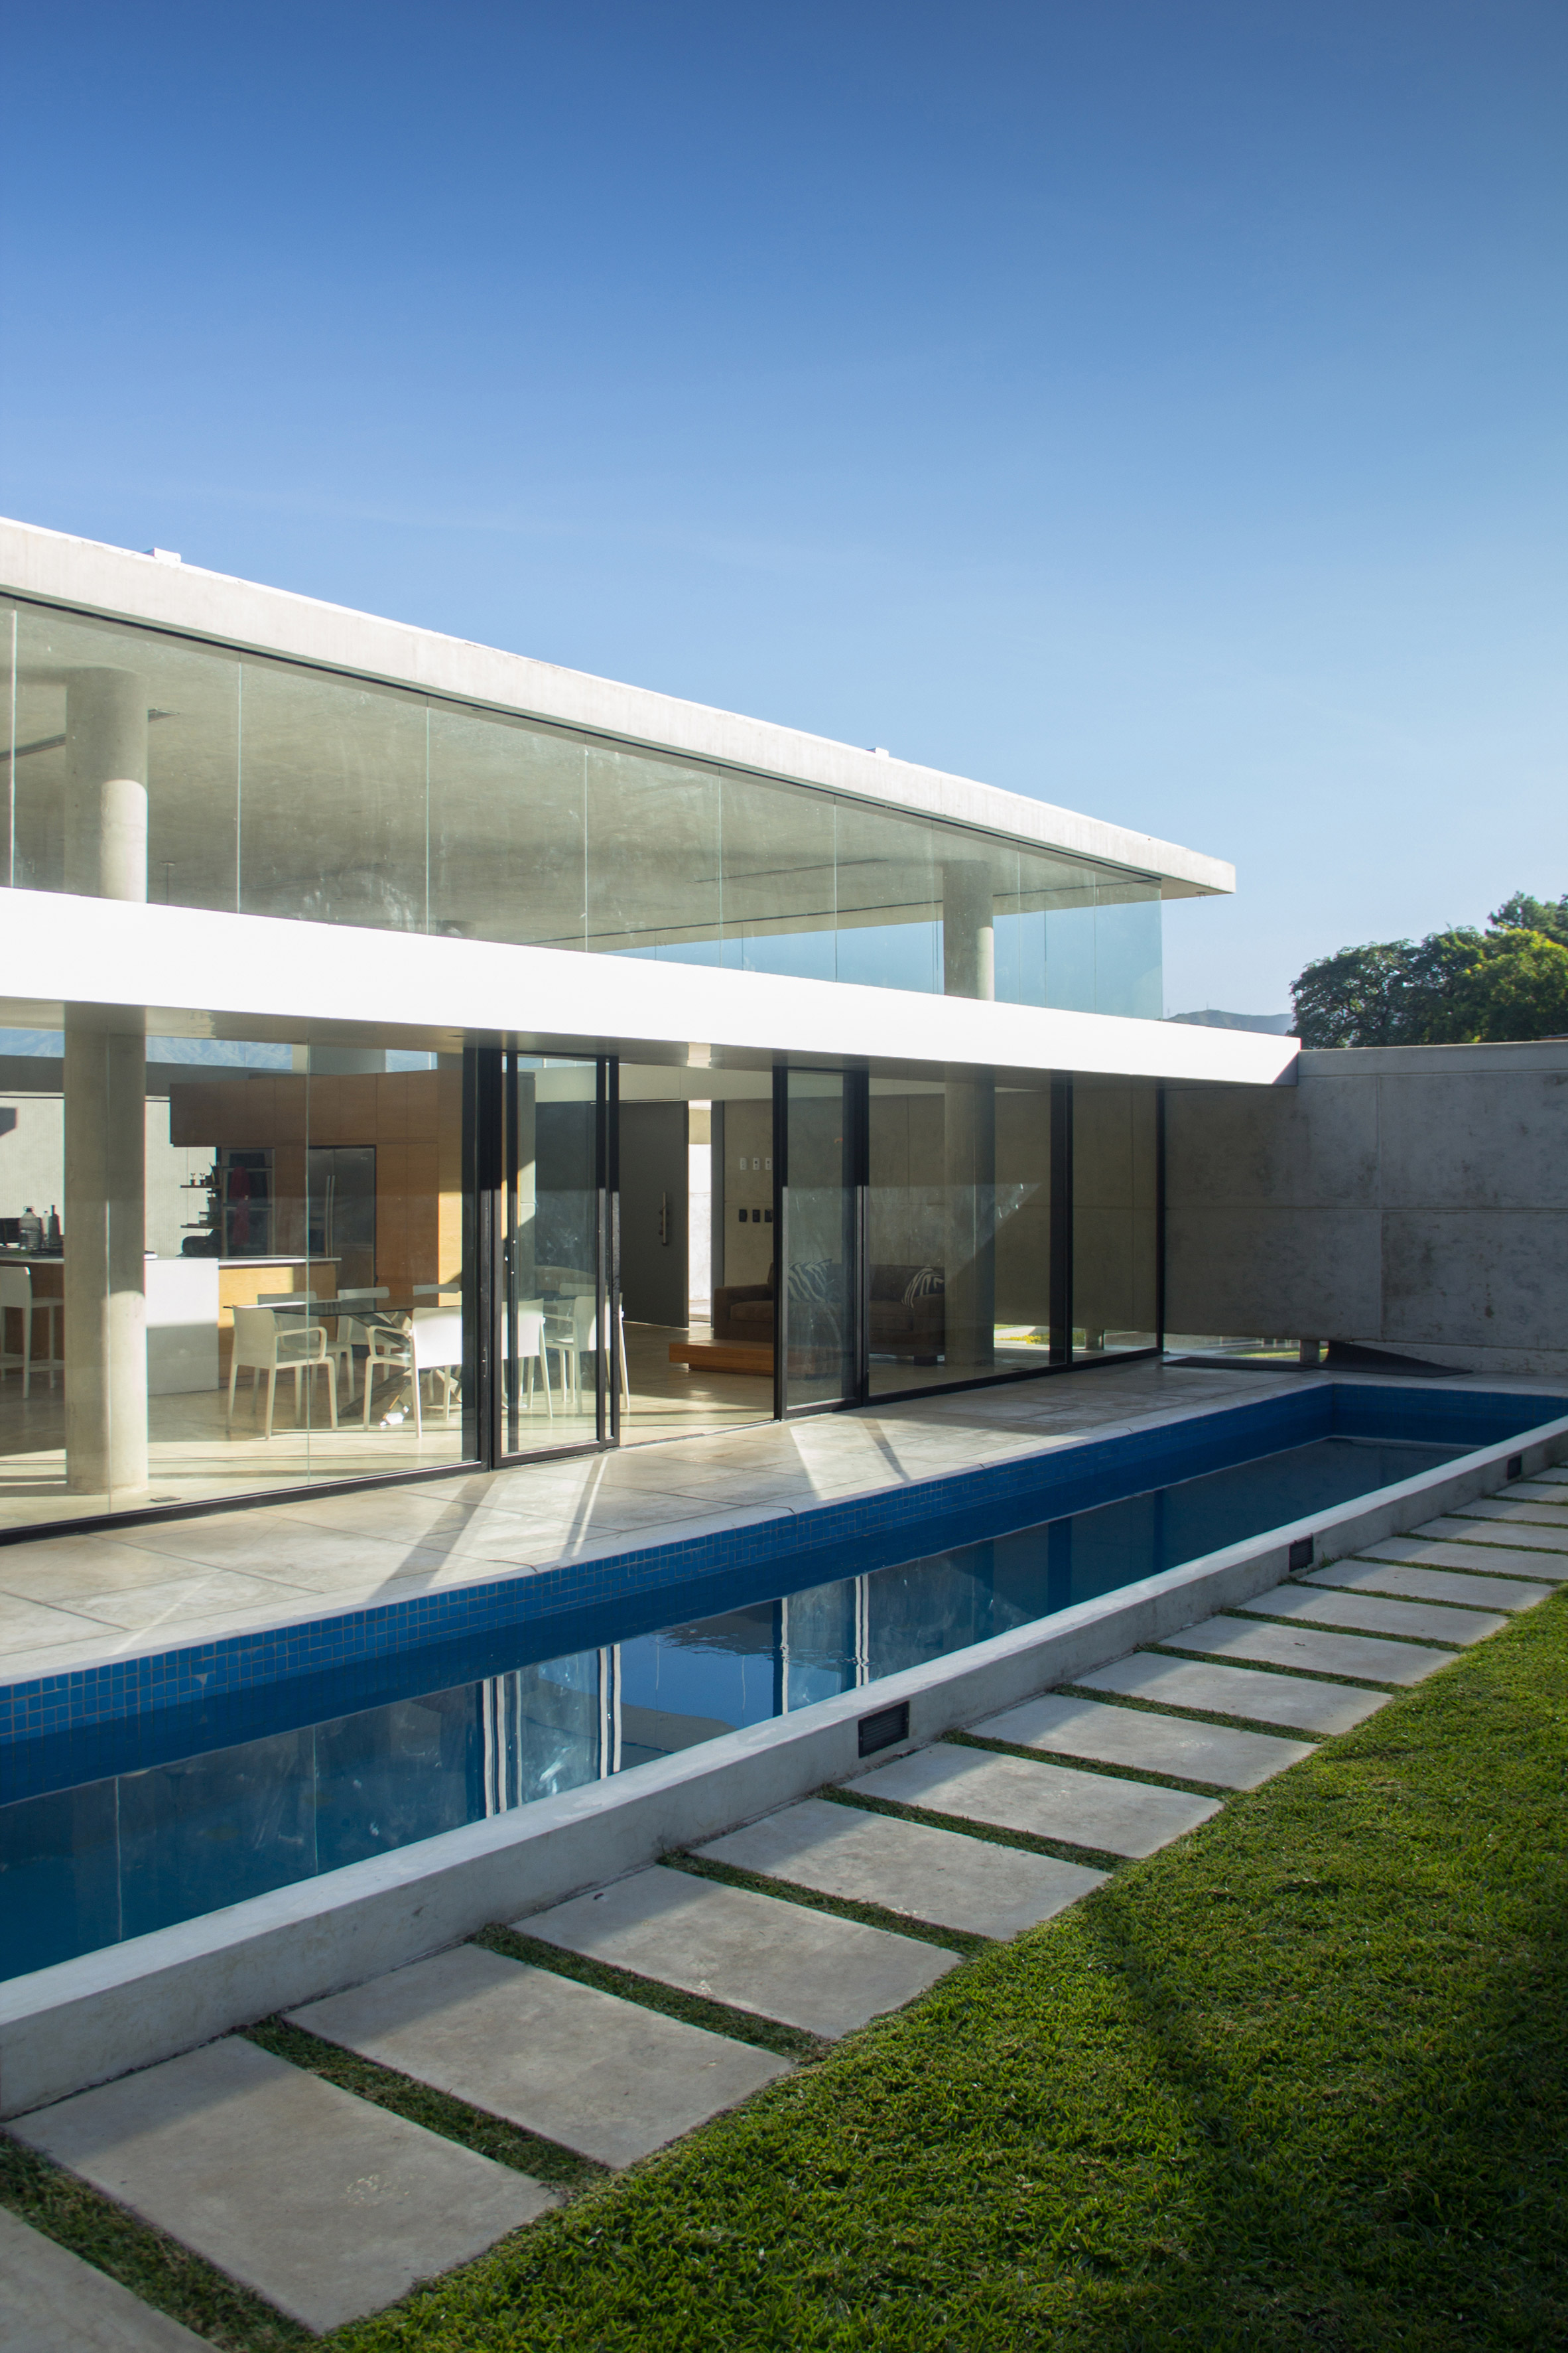 NMD Nomadas' concrete and glass house in Venezuela features skinny swimming pool